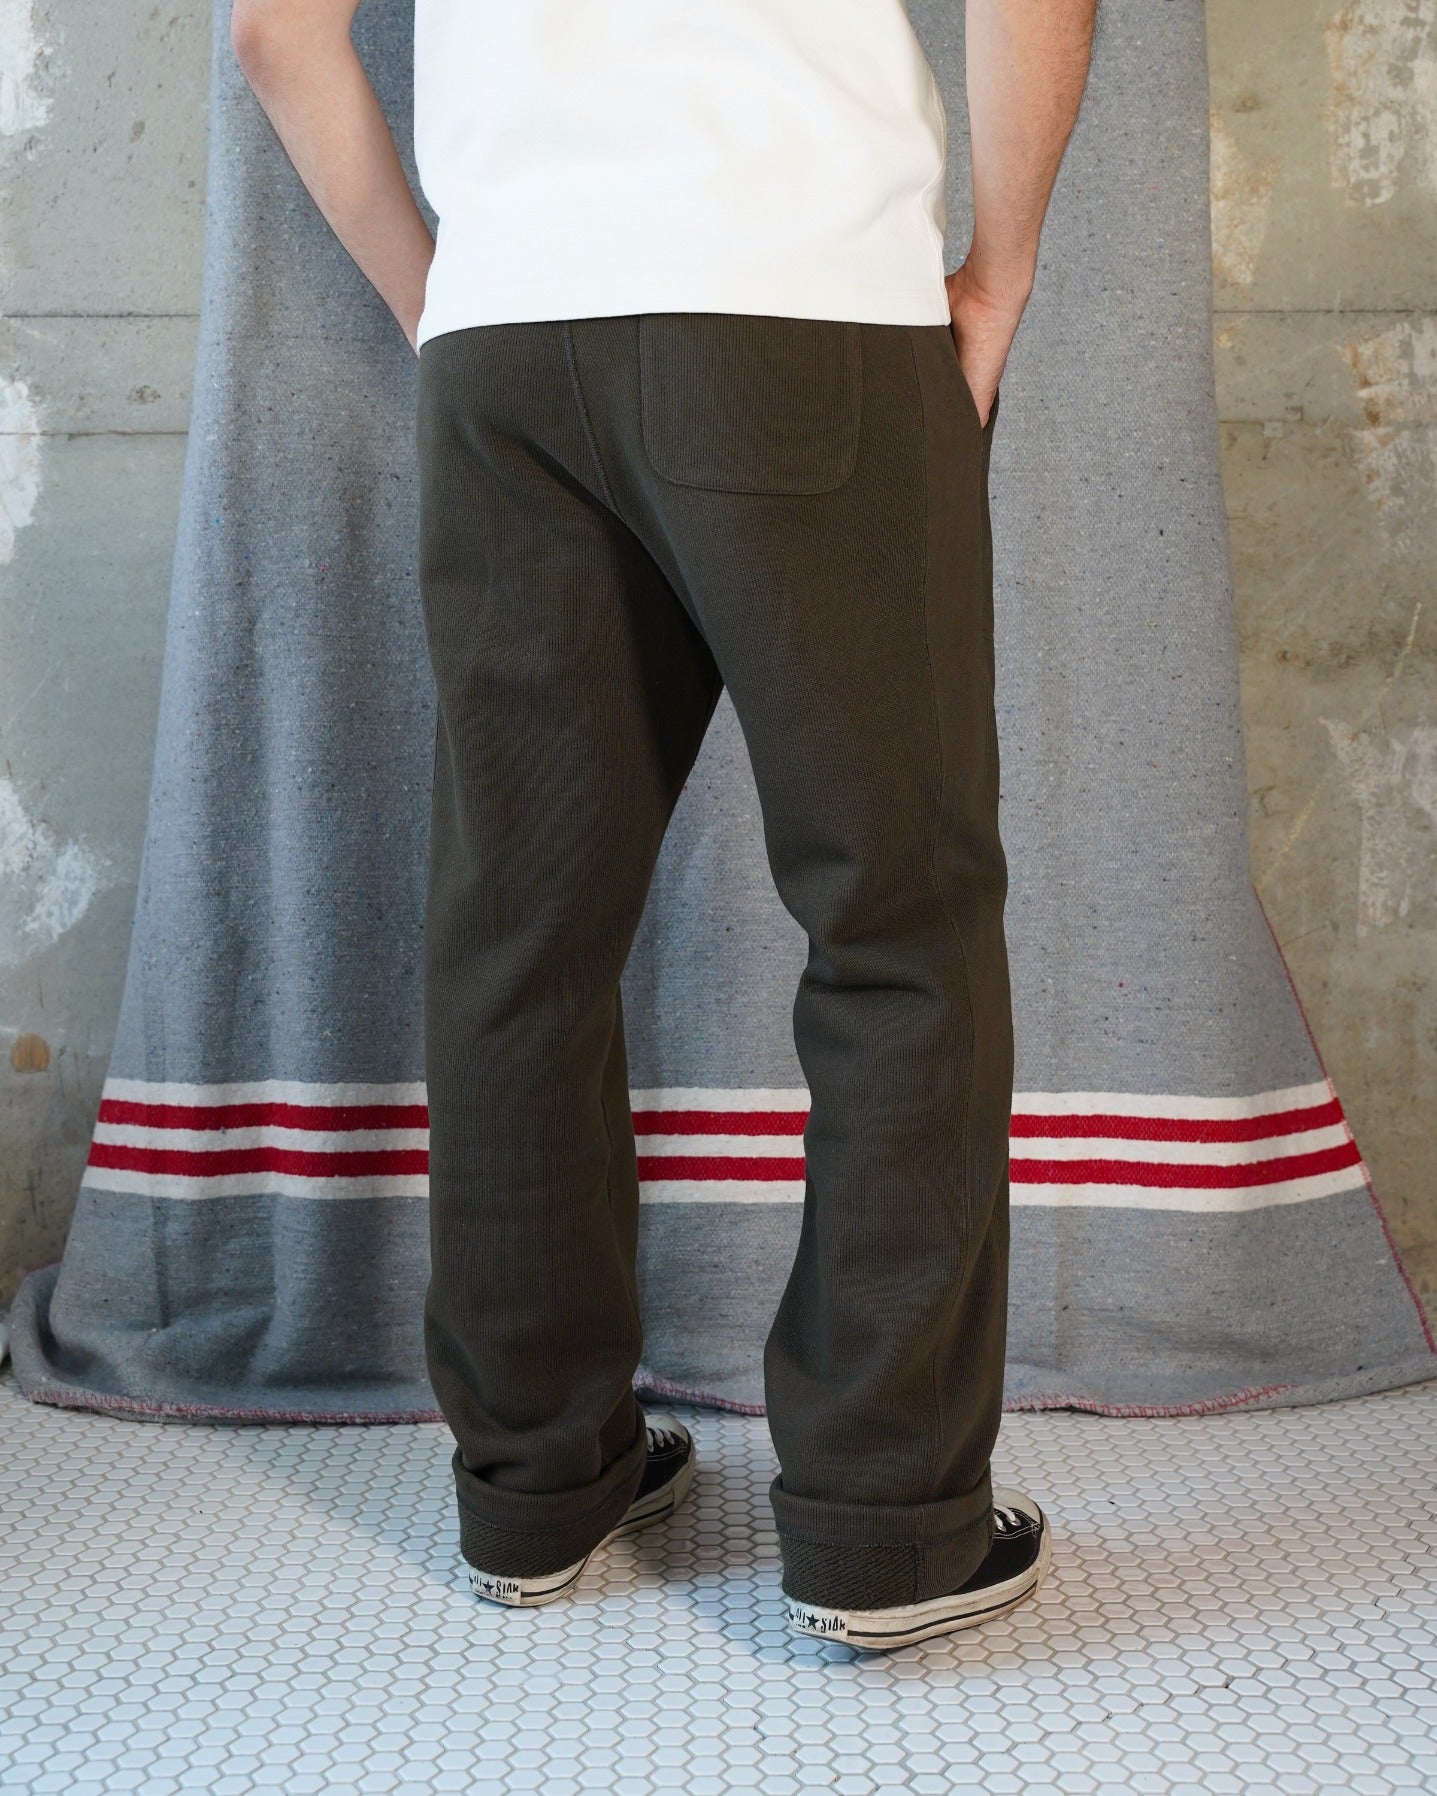 Sweatpants - 701gsm Double Heavyweight French Terry - Khaki